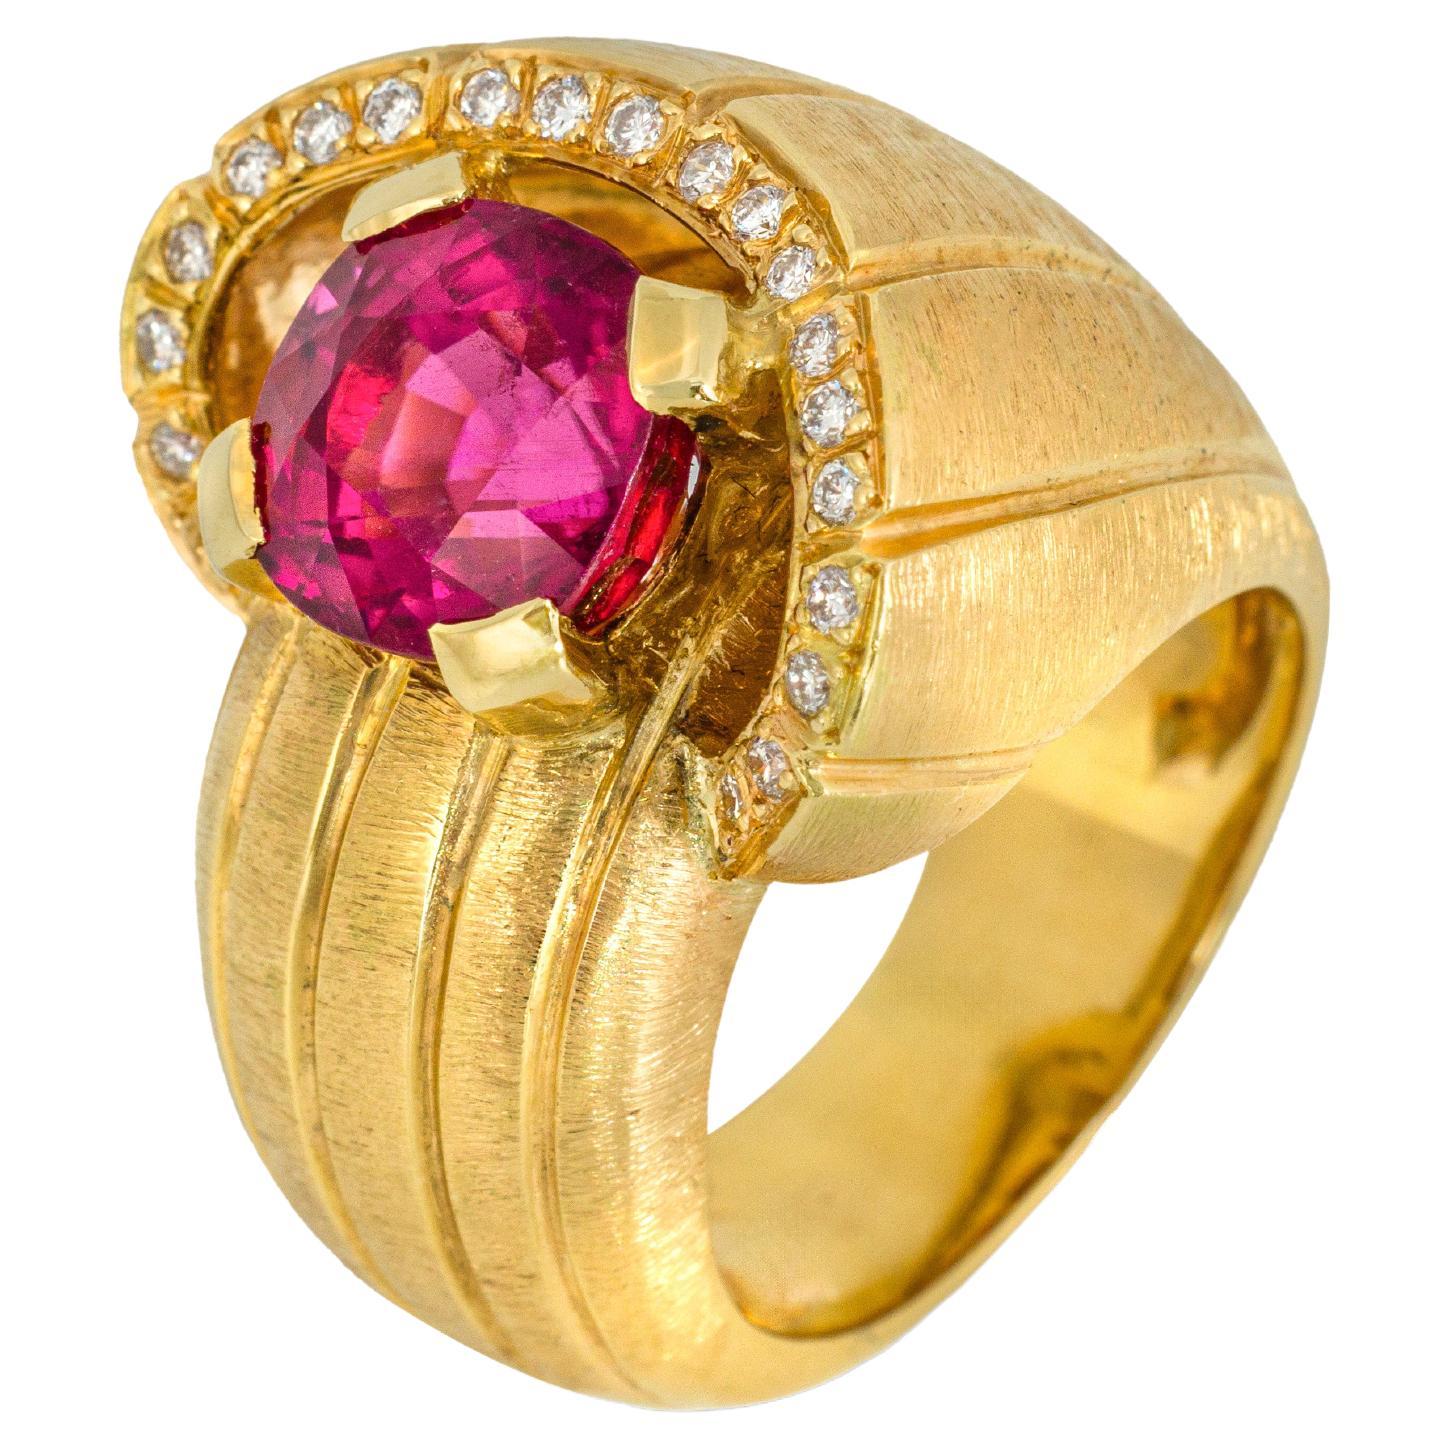 "Costis" Snail Shell Ring with a Rubellite of 4.65 carats and Diamonds 